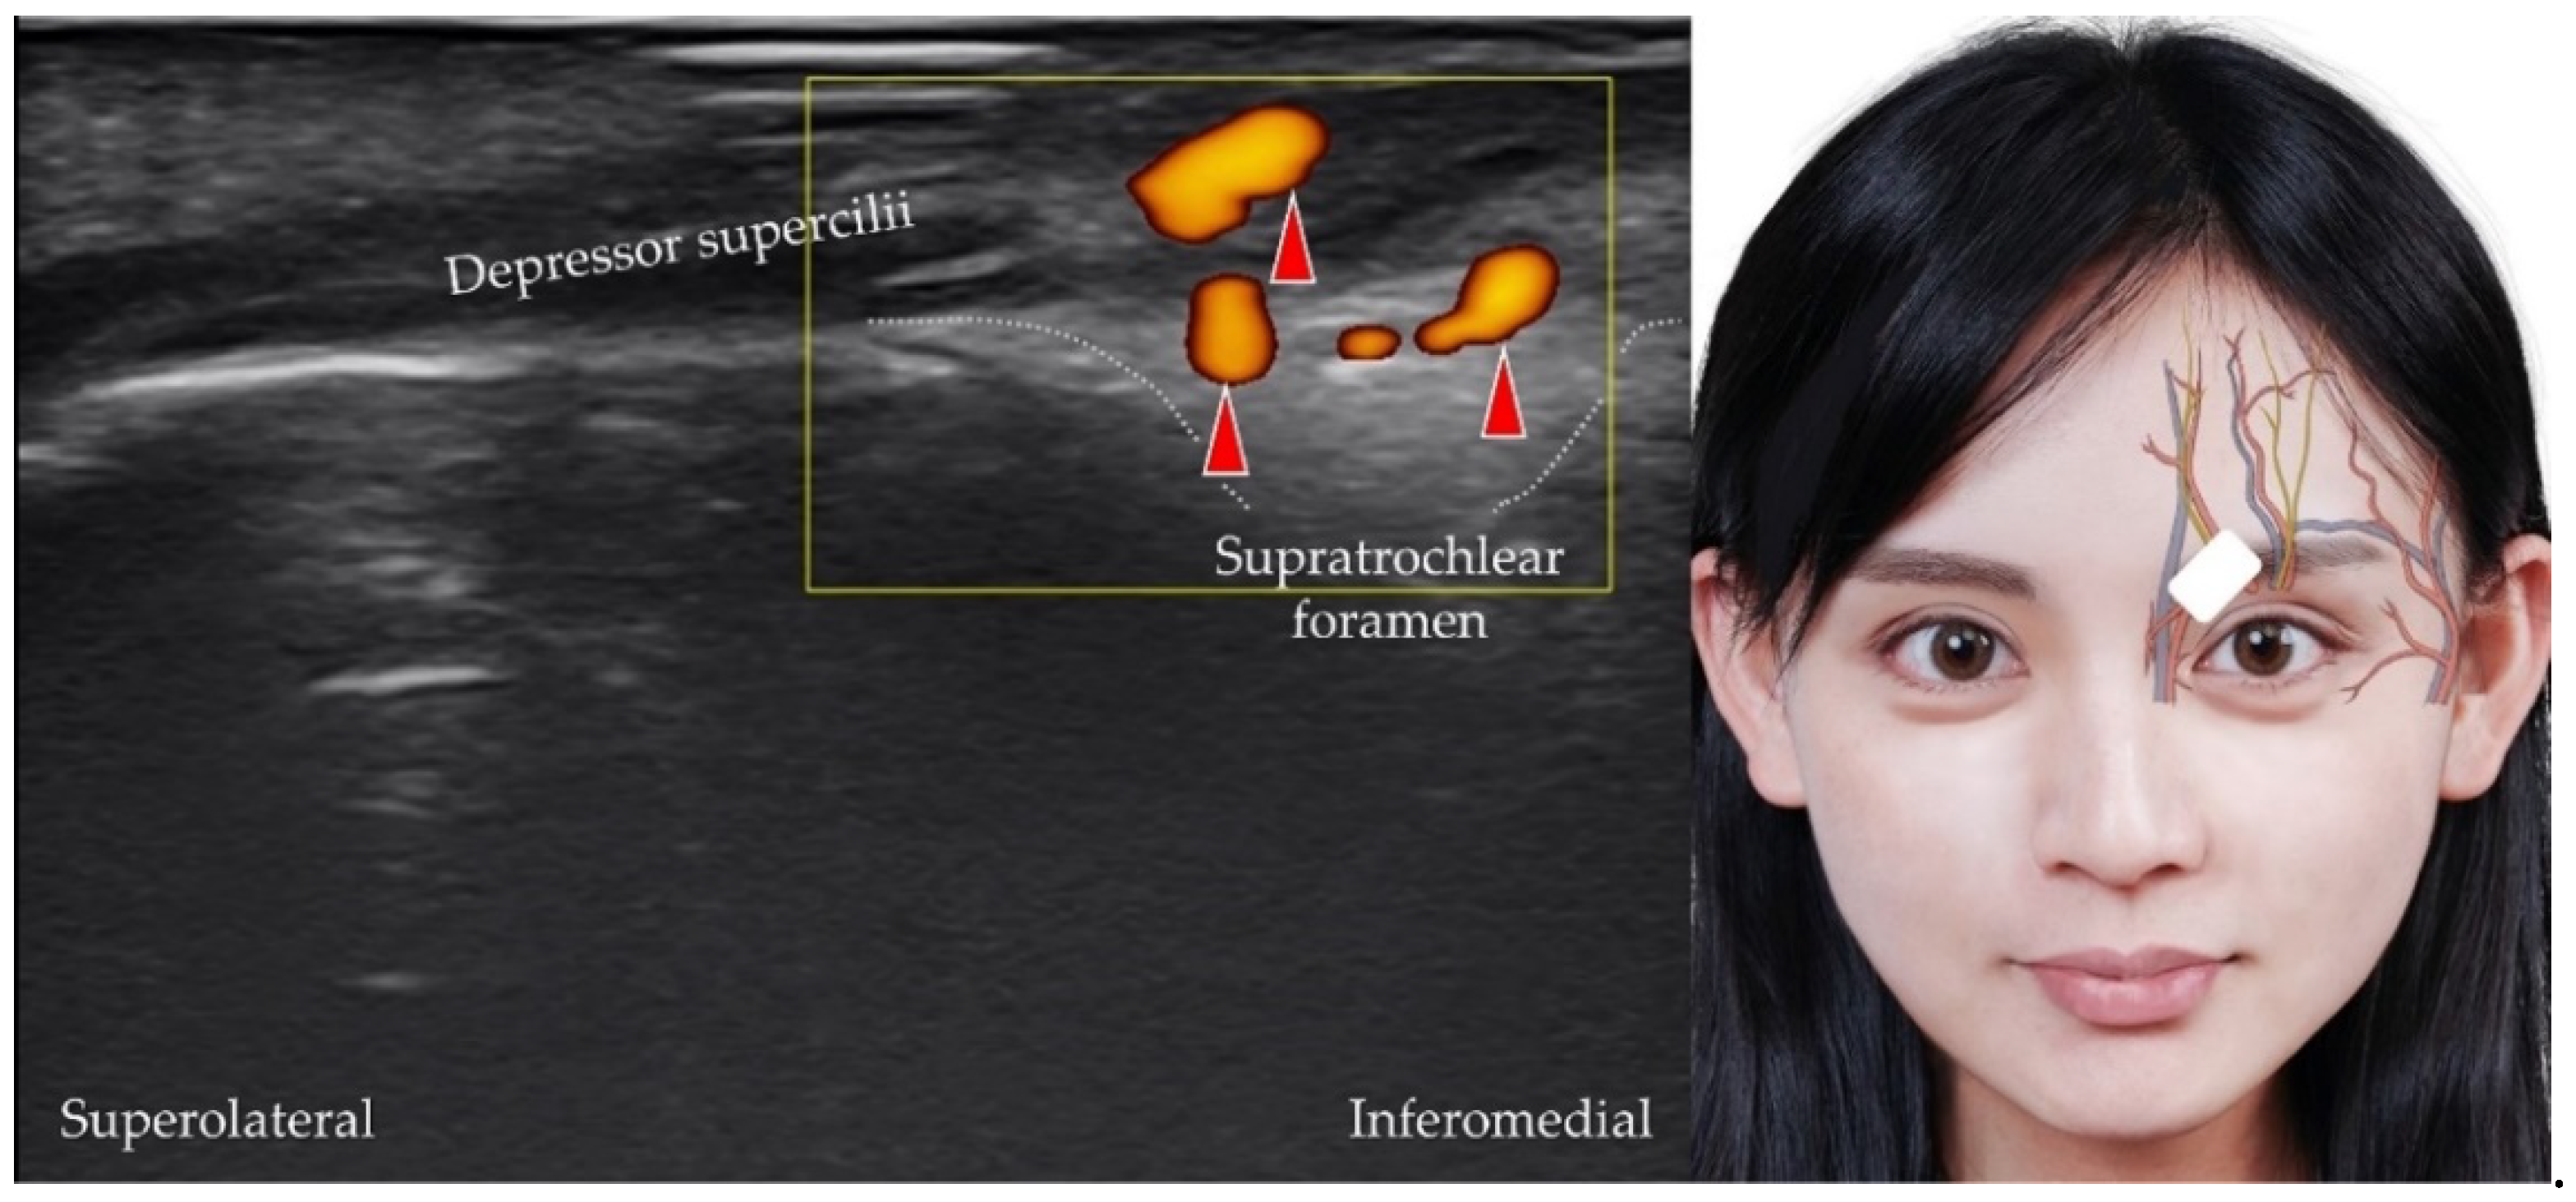 Diagnostics Free Full Text Ultrasound Imaging Of Facial Vascular Neural Structures And 1004